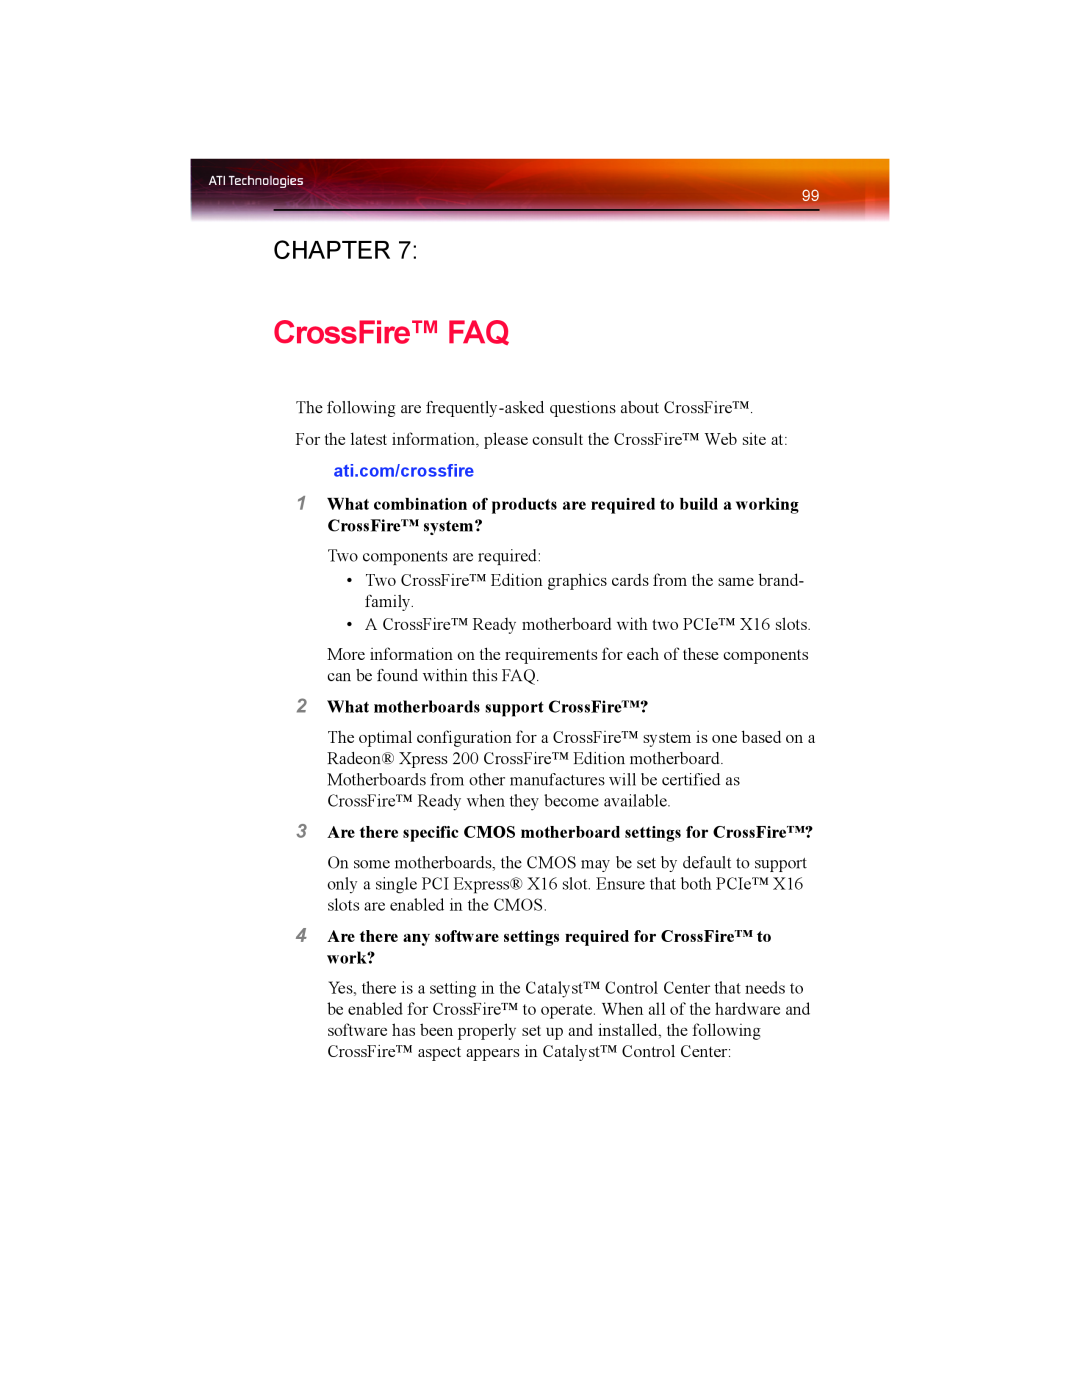 ATI Technologies X1550 SERIES manual CrossFire FAQ, Chapter, ati.com/crossfire, What motherboards support CrossFire? 